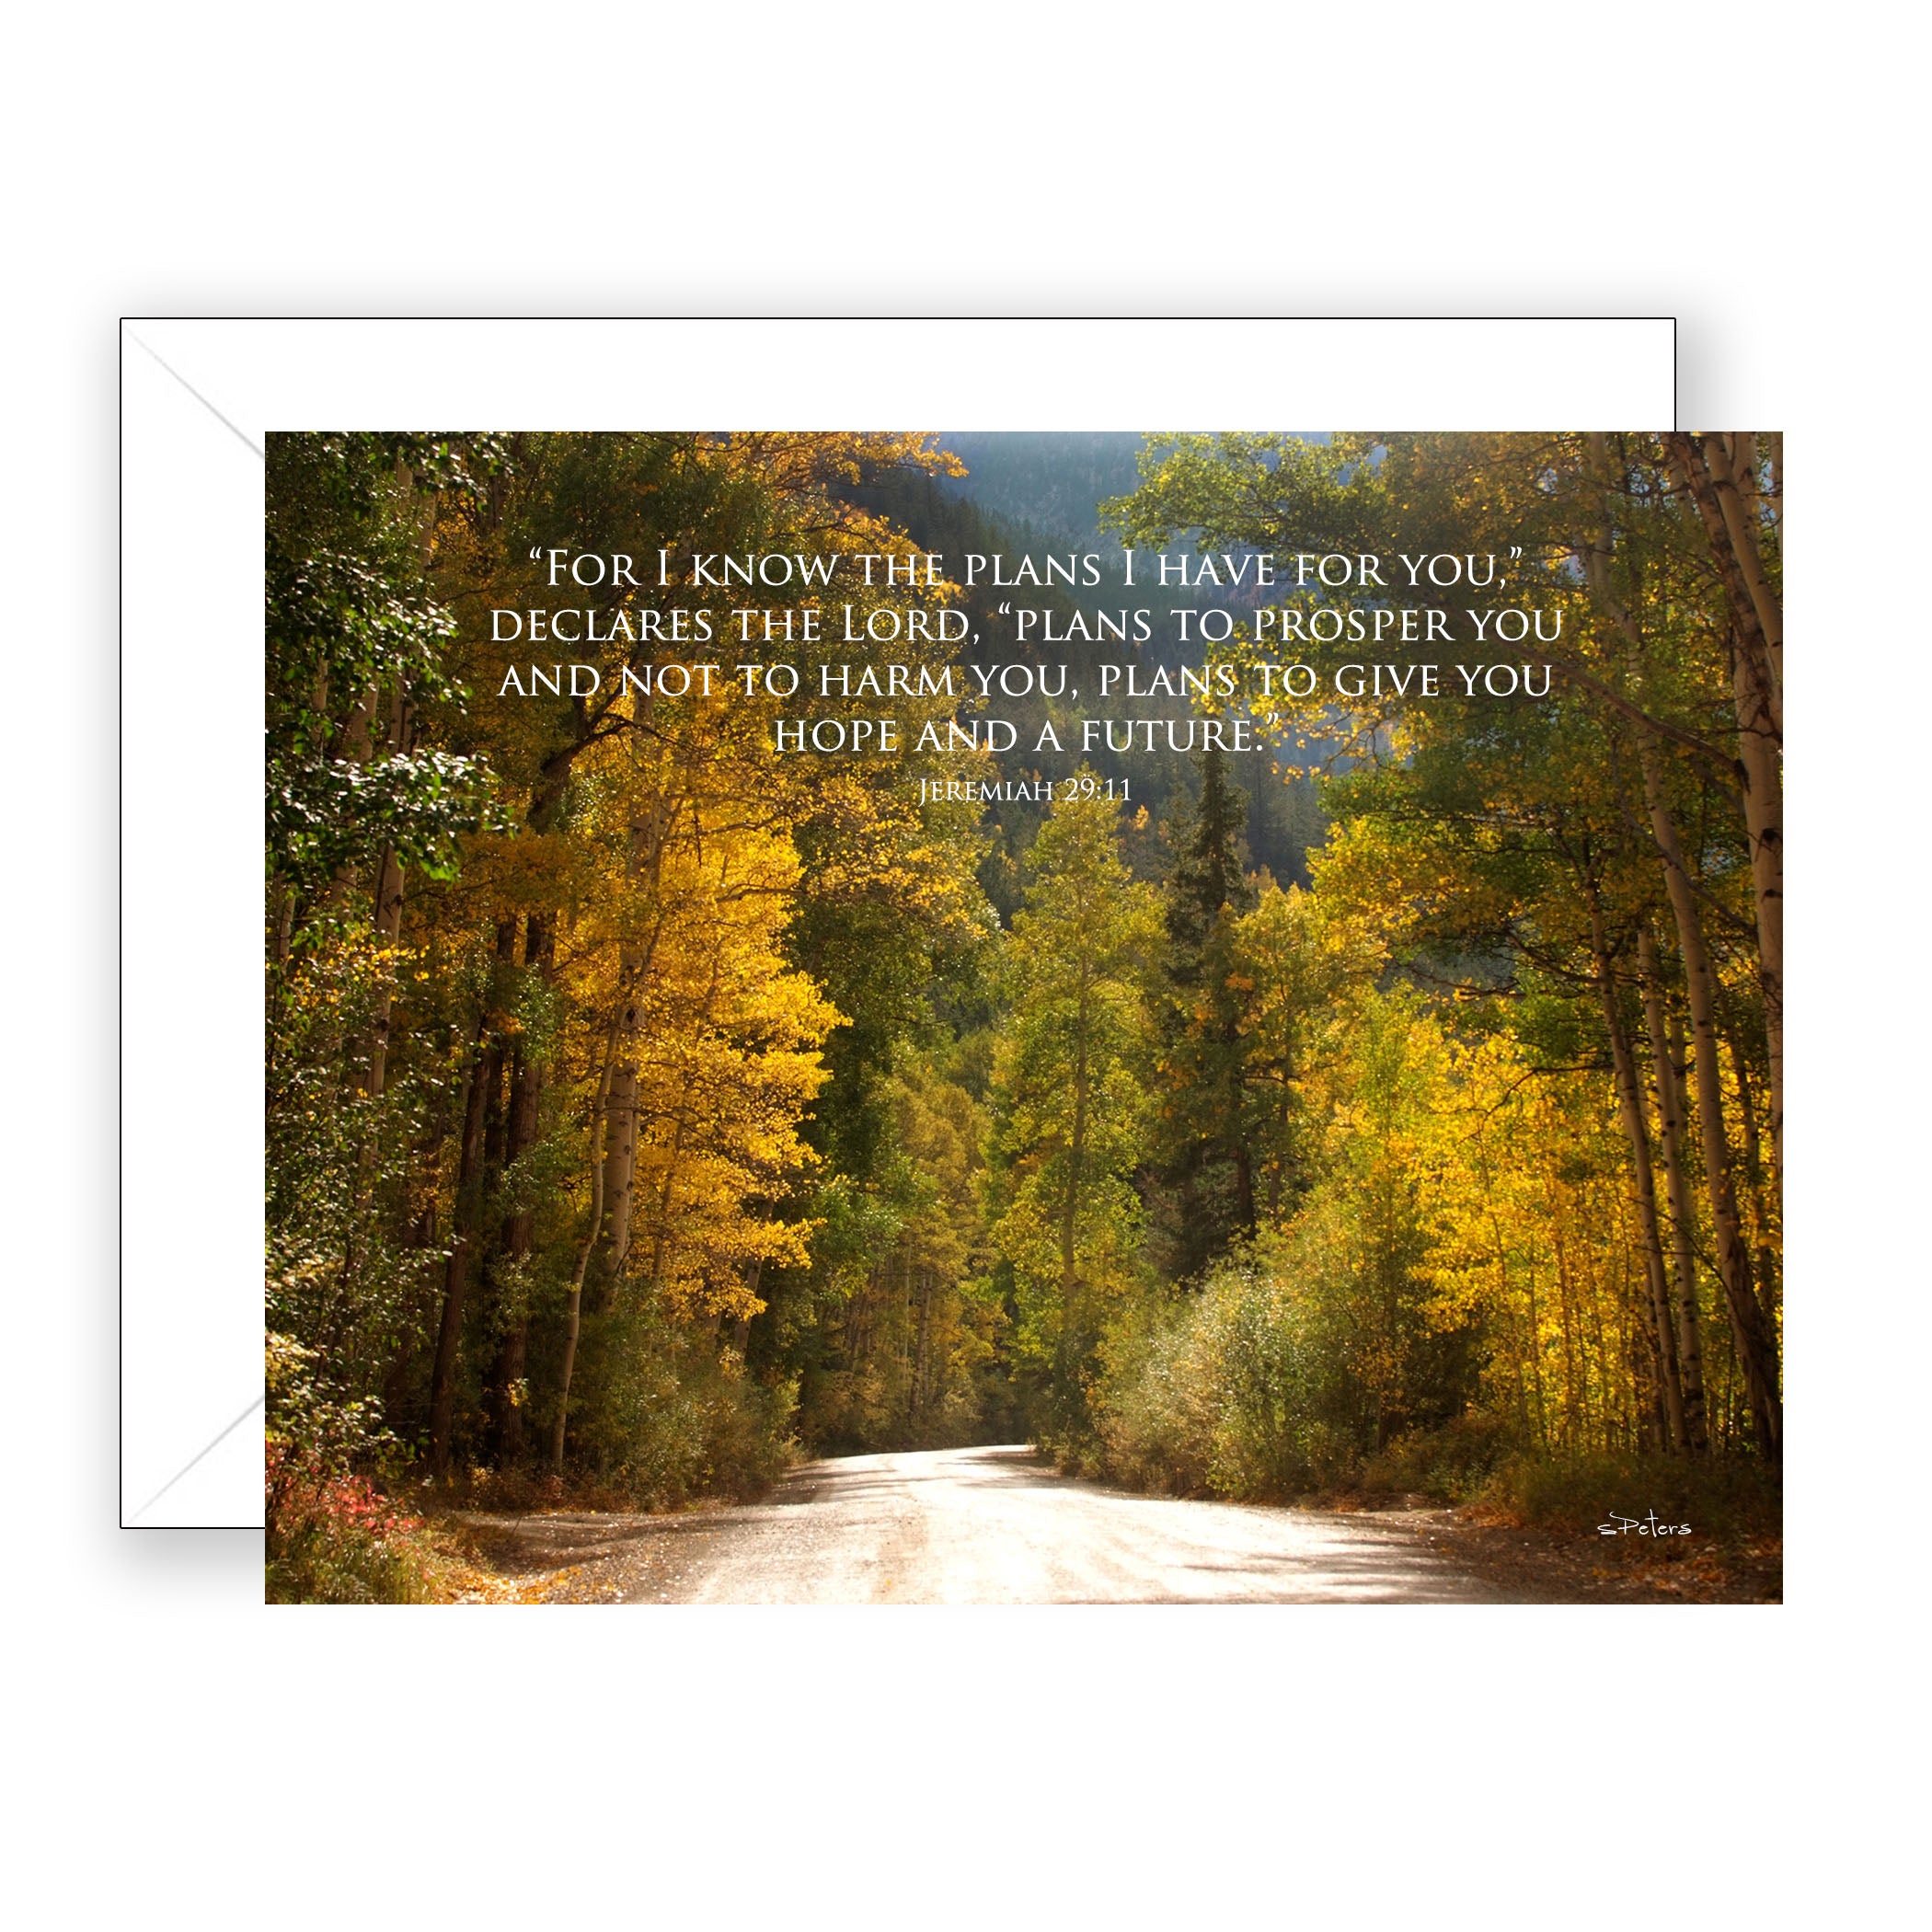 Autumn Afternoon (Jeremiah 29:11) - Encouragement Card (Blank)